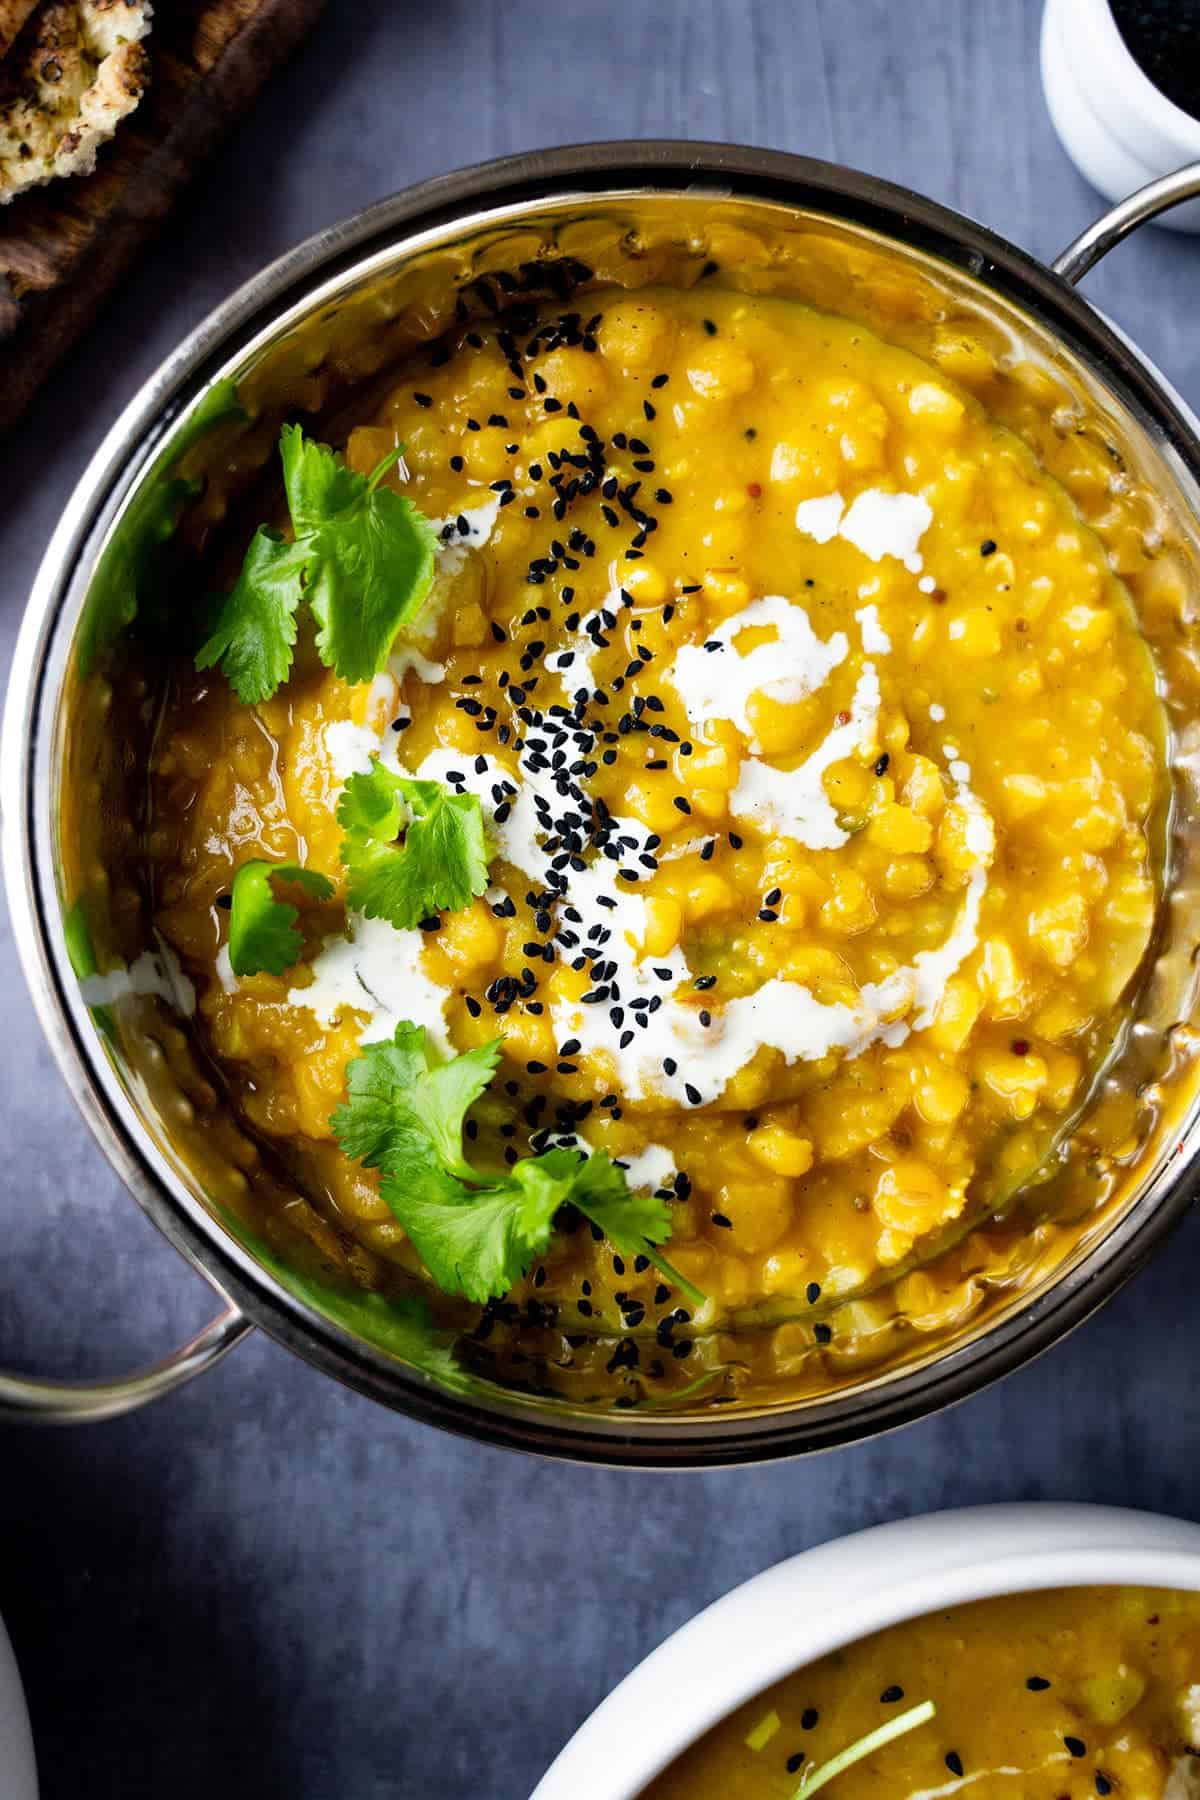 Matar dal in a Balti dish topped with nigella seeds and cream.